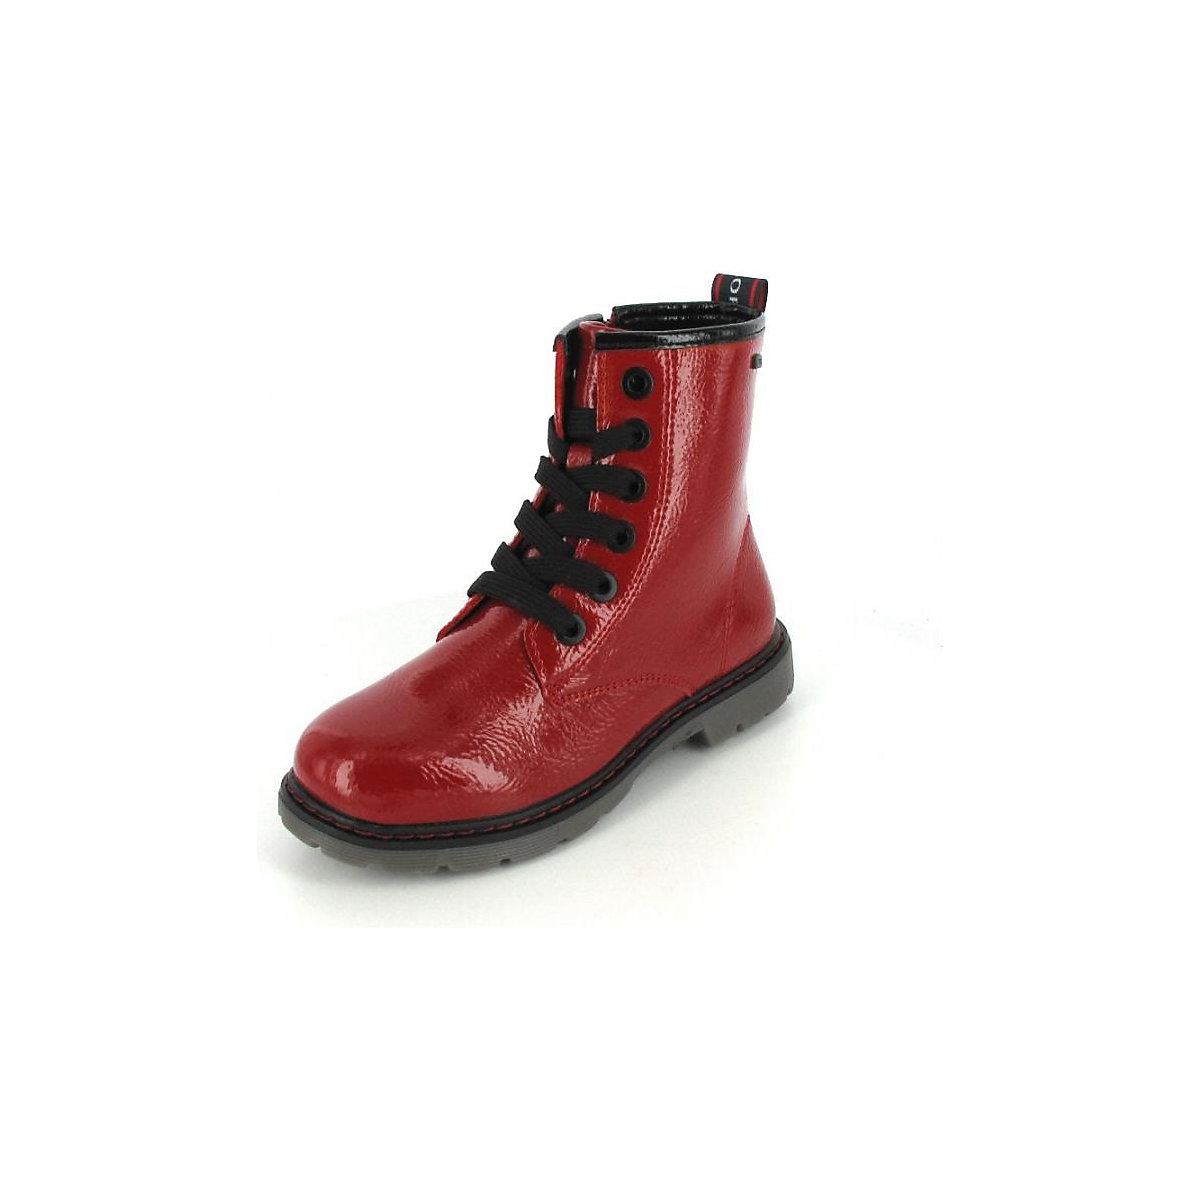 TOM TAILOR Boots Stiefel rot